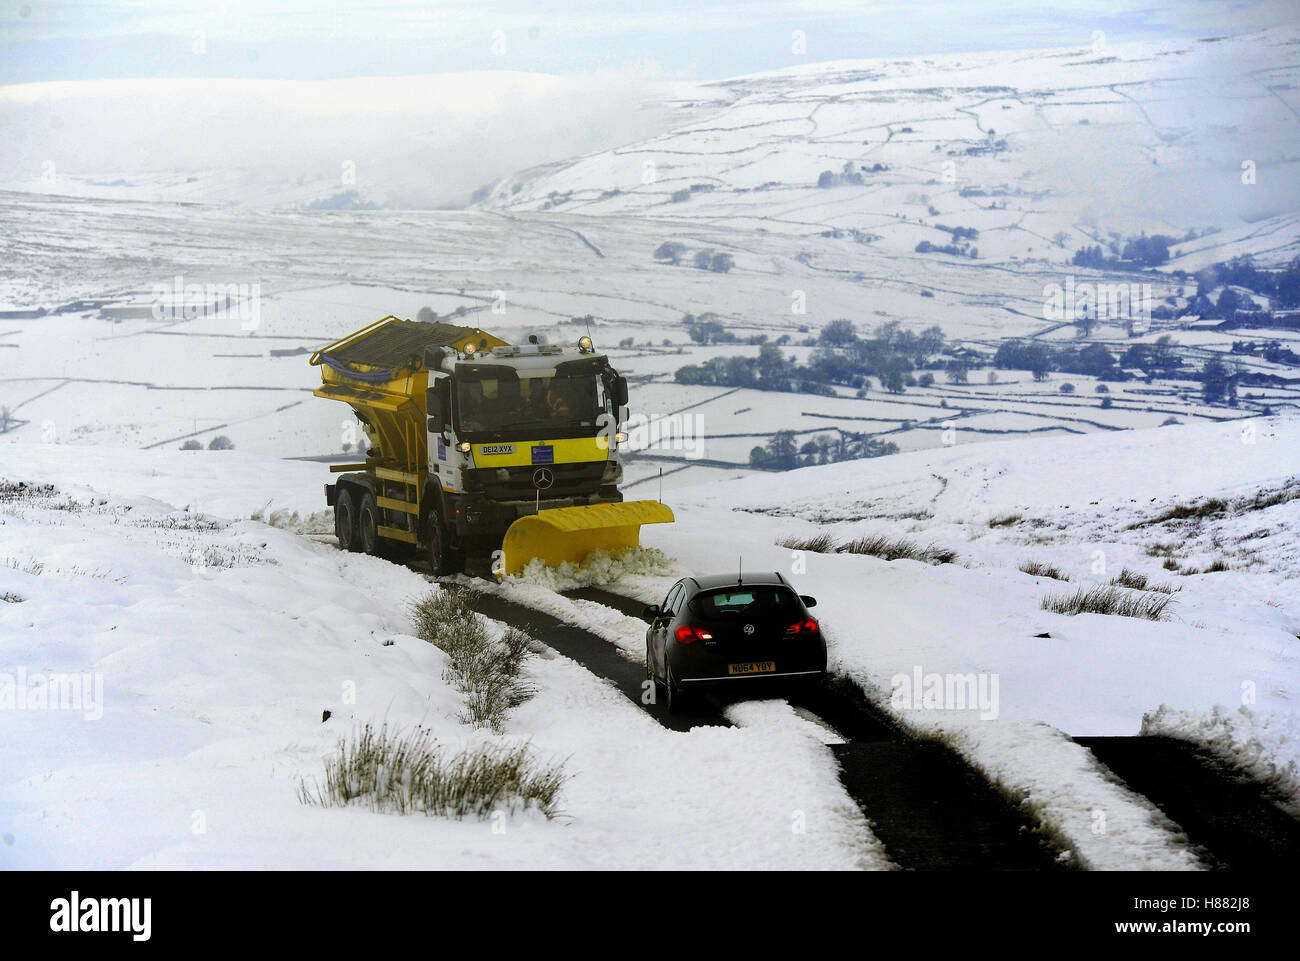 A snowplough clears a road over Grinton Moor near Reeth, as heavy overnight snowfalls across northern parts of the UK made travelling difficult. Stock Photo